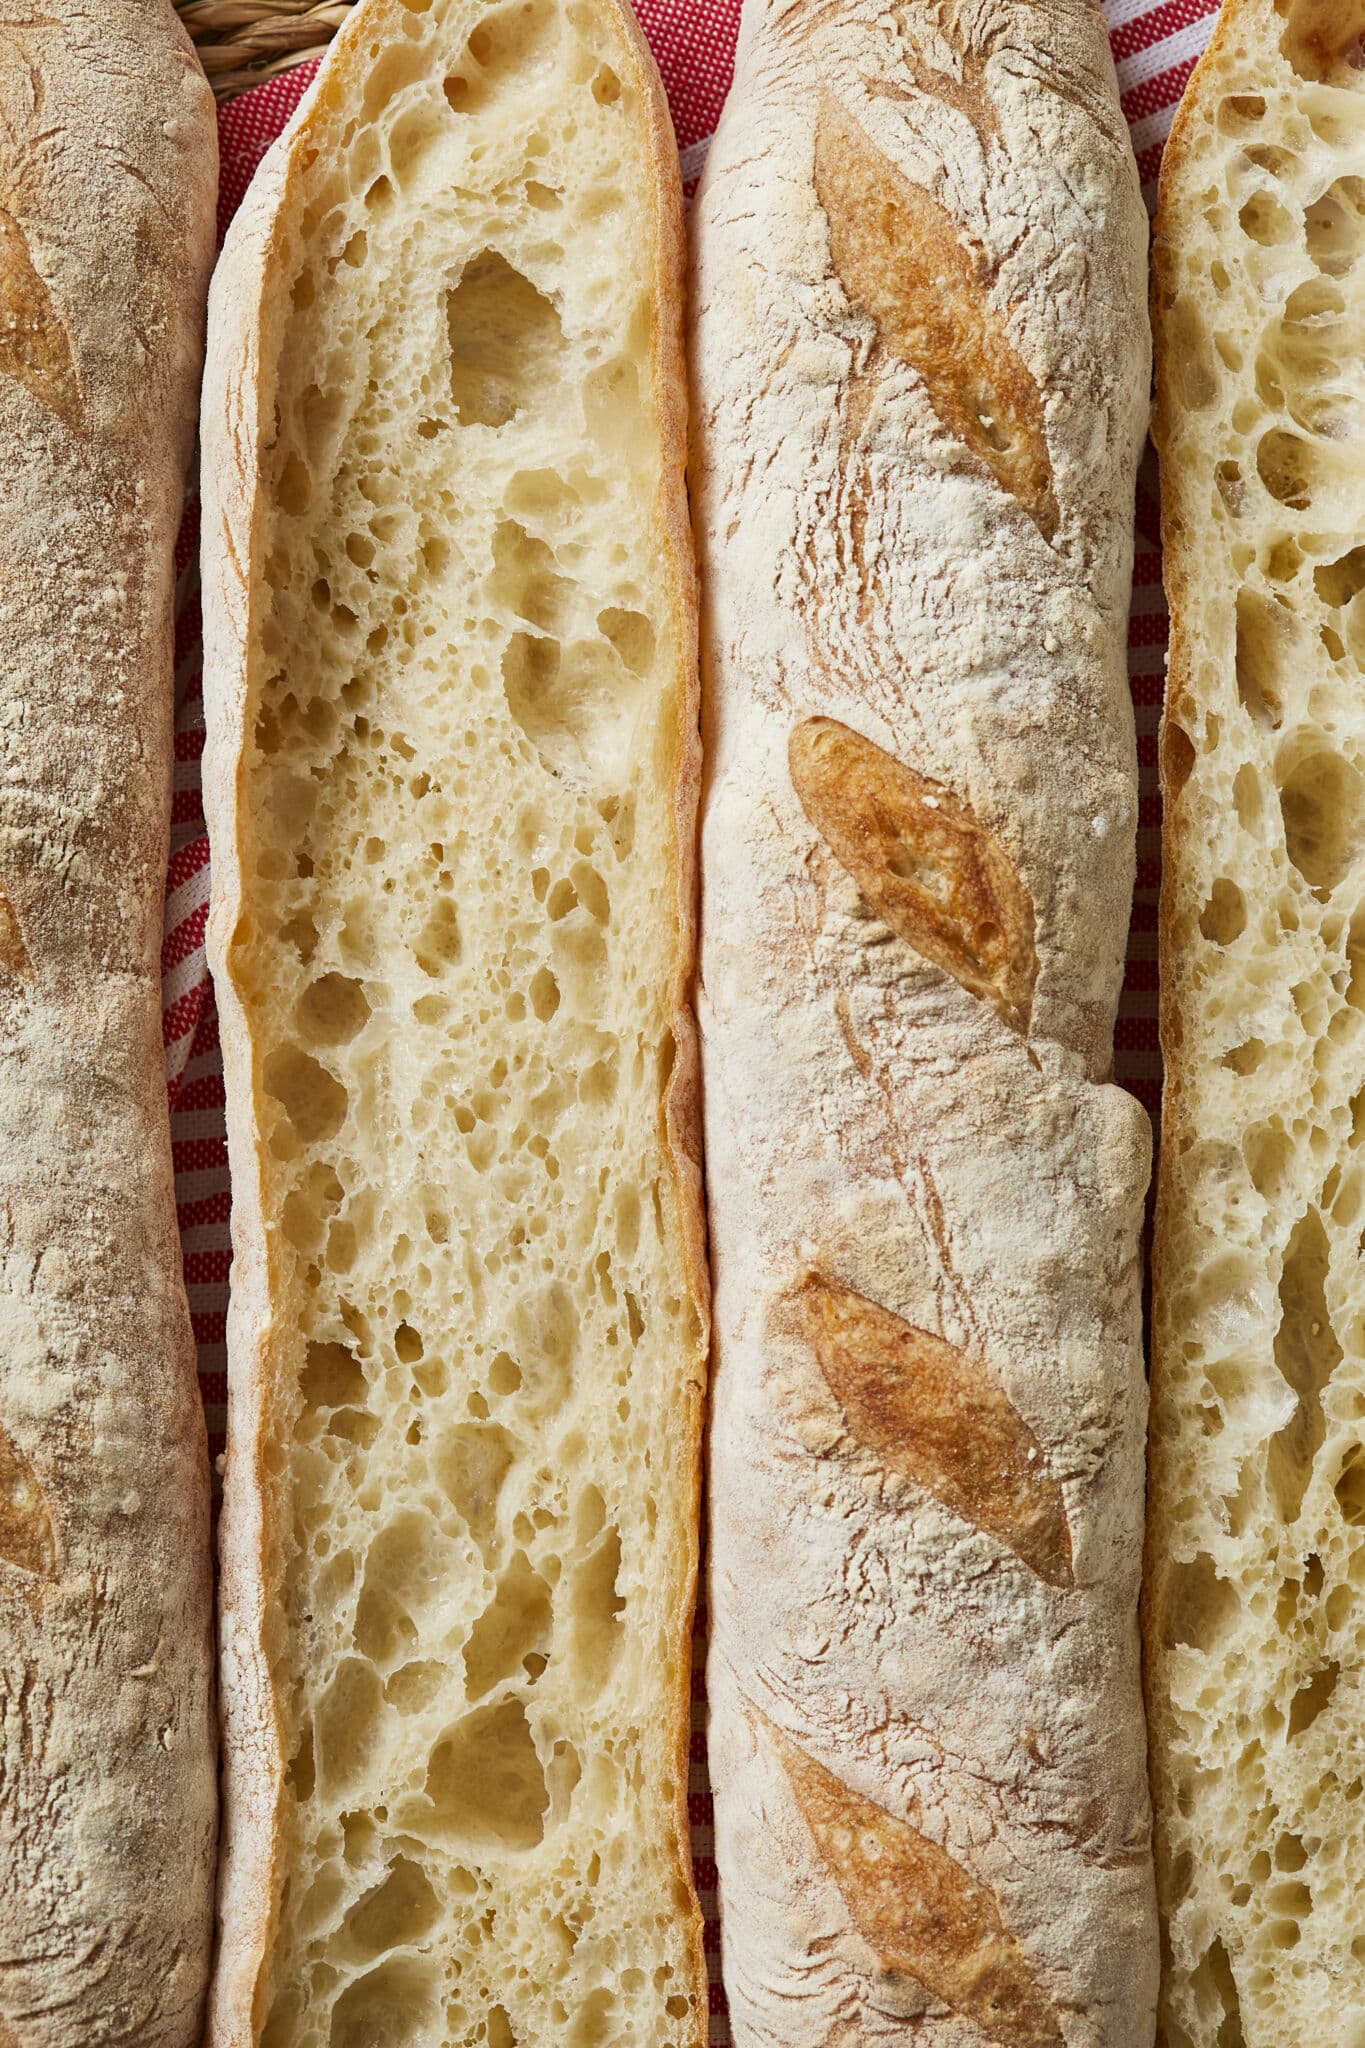 The Easiest No Knead Baguettes were cut open, with two showing the crispy golden brown crust and the other two showing the lacy crumb with deep air pockets. 